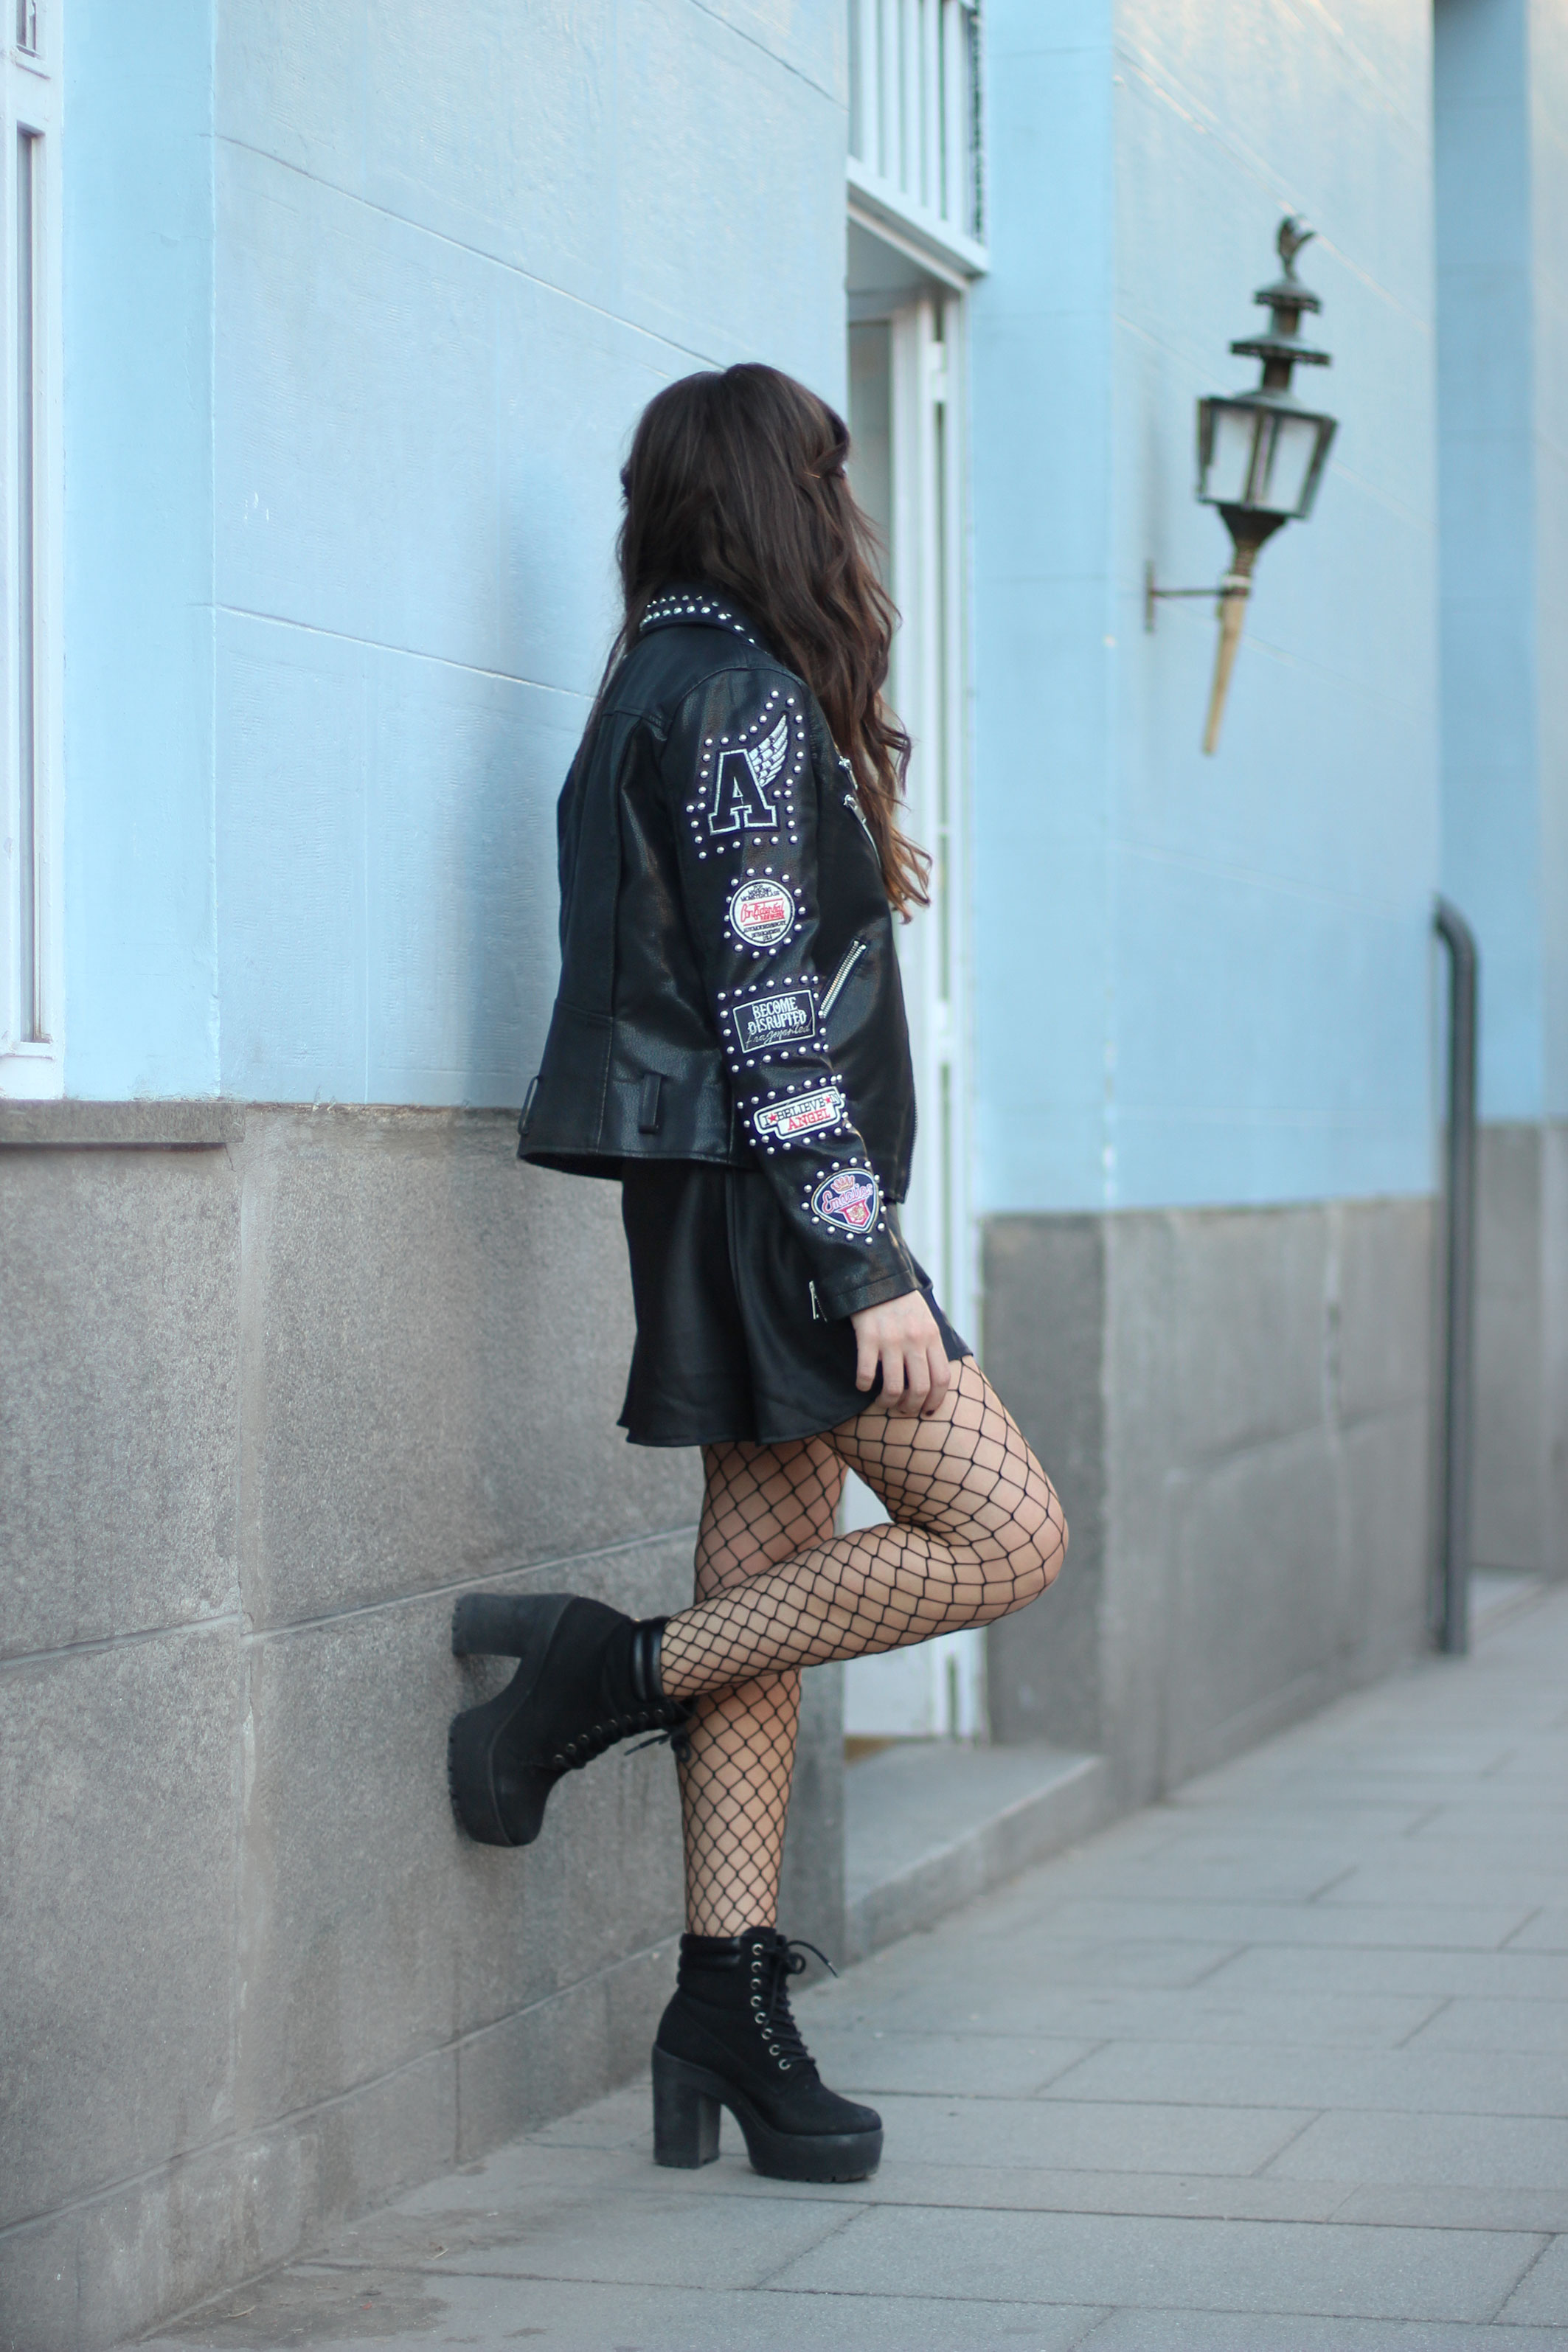 fishnet tights trend, lace dress, leather patch jacket, street style